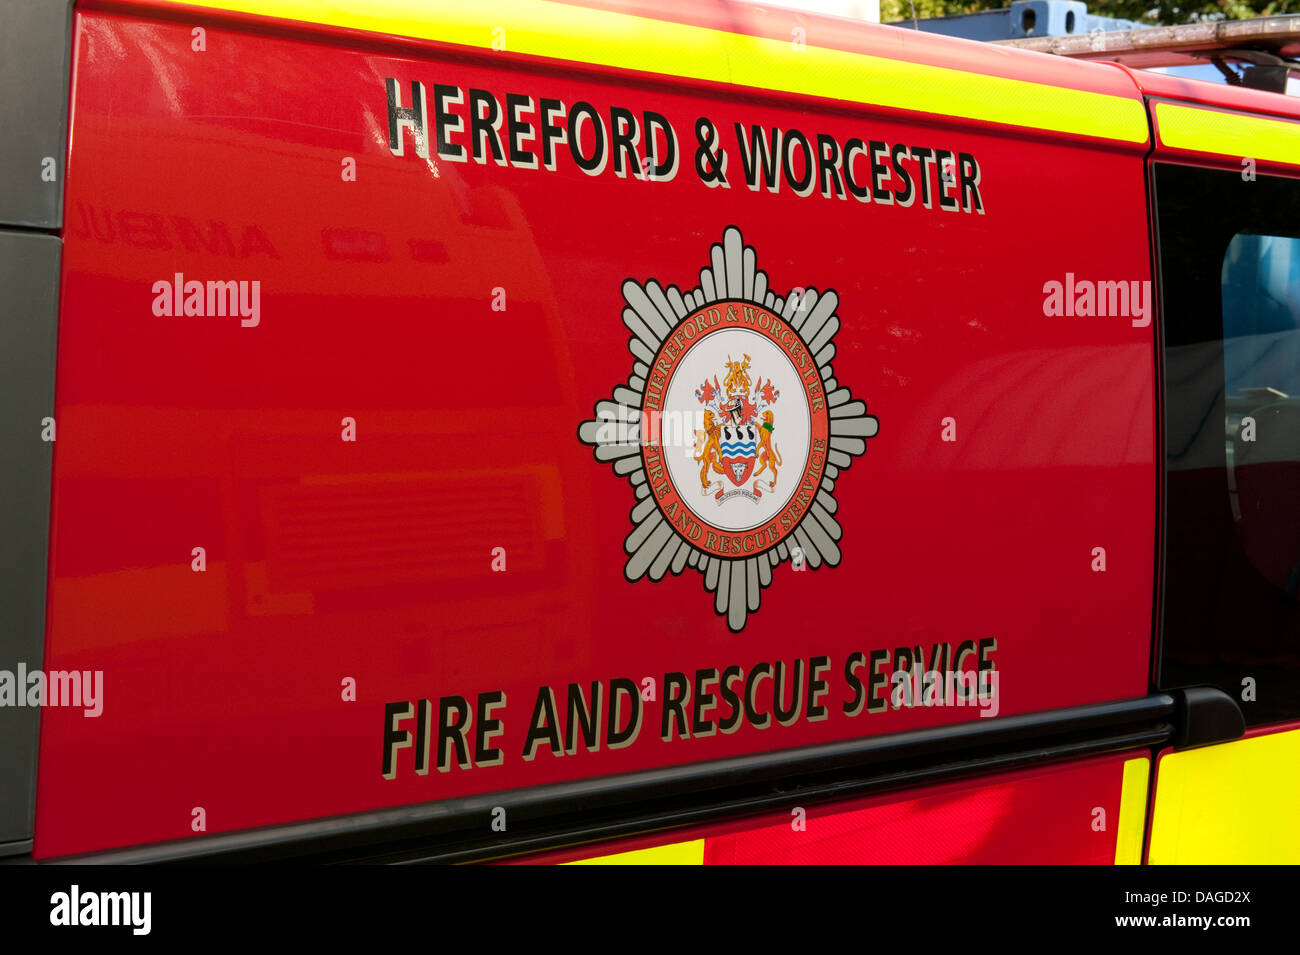 Hereford & Worcester Fire and Rescue Service Stock Photo